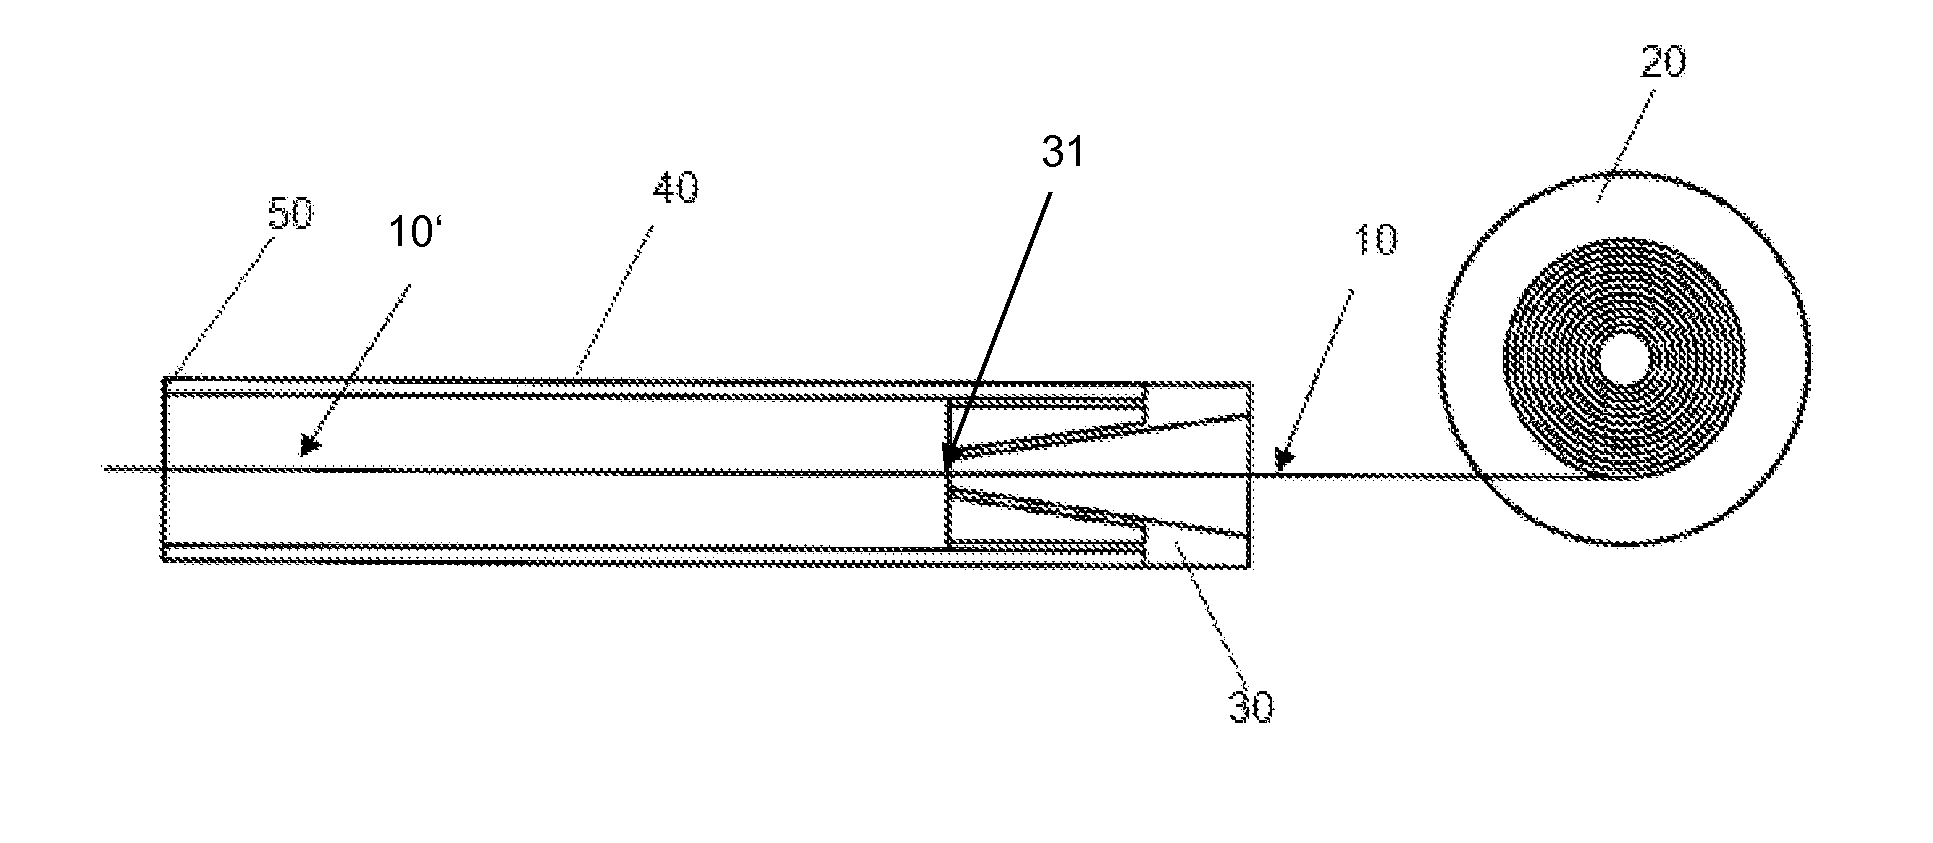 Method and apparatus for measuring the temperature of a molten metal